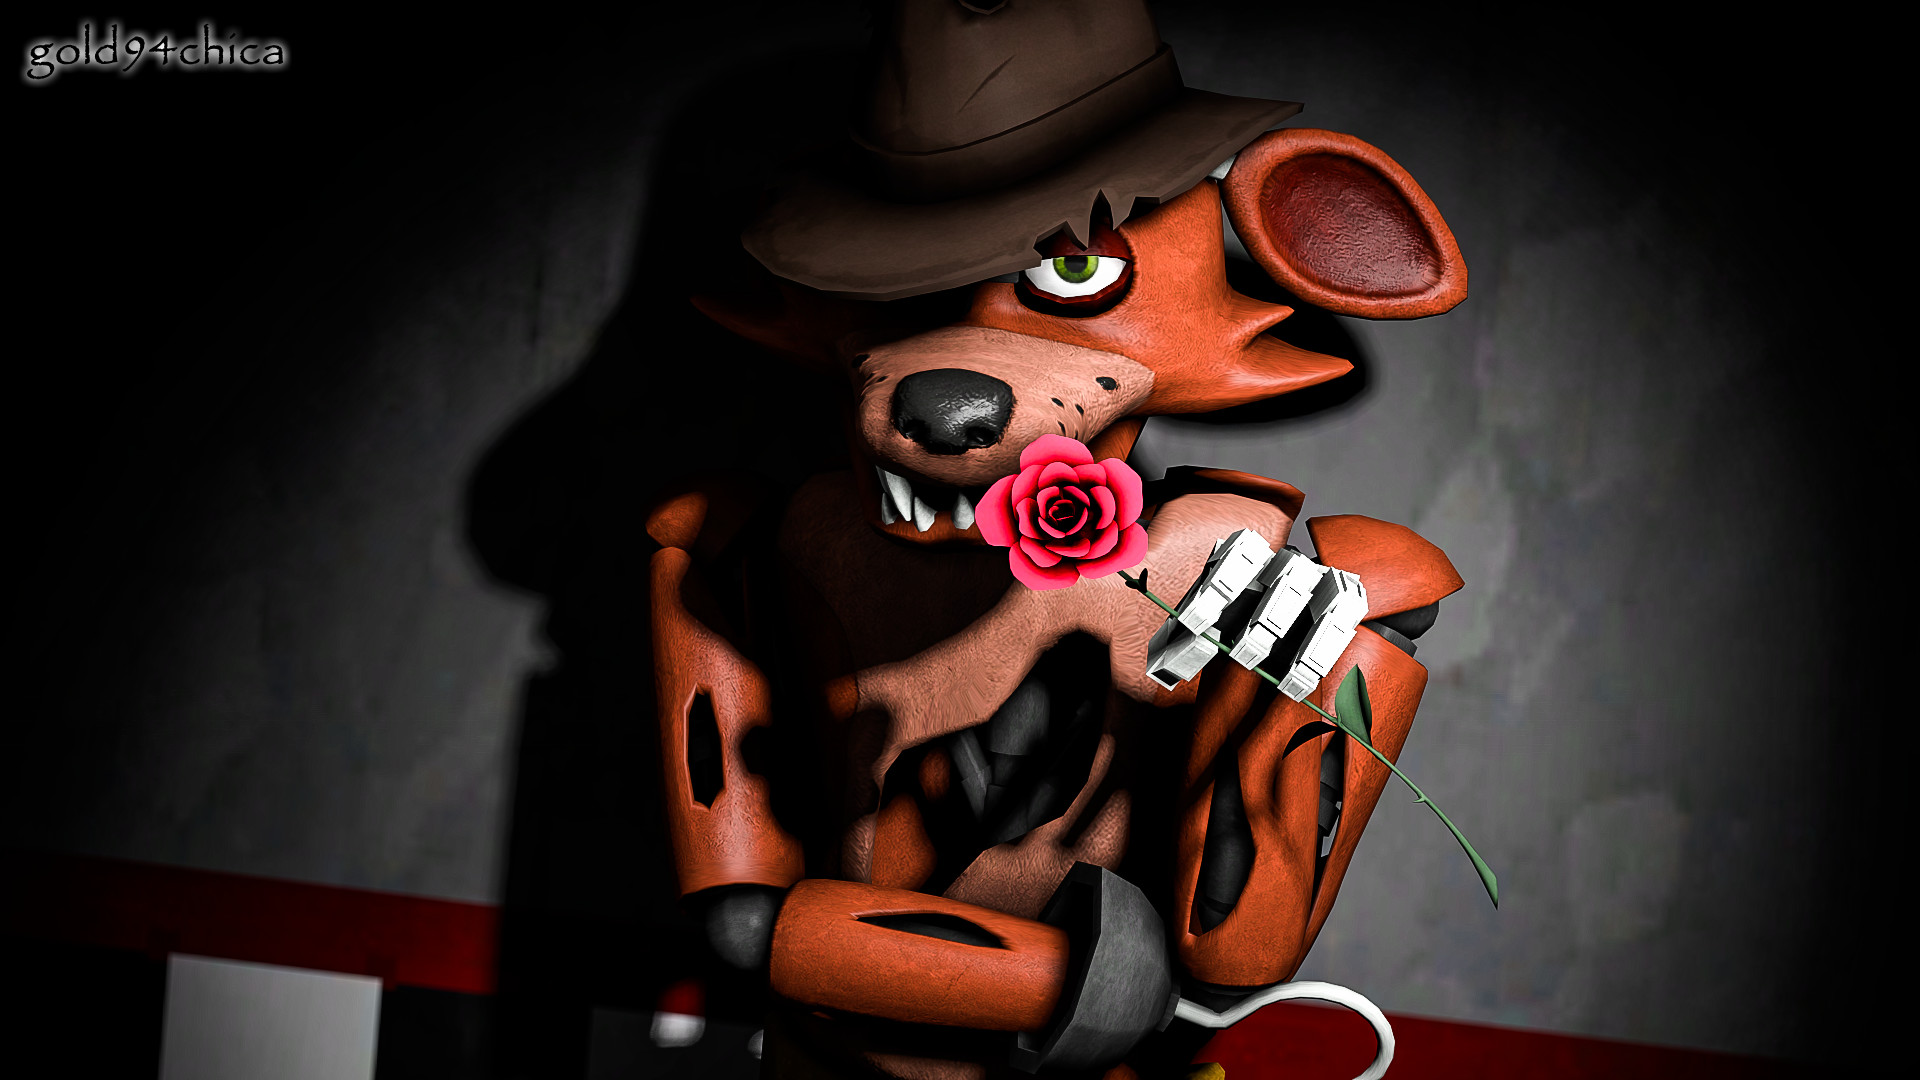 1920x1080 Oh, I've been waiting for you (Foxy SFM Wallpaper) by .